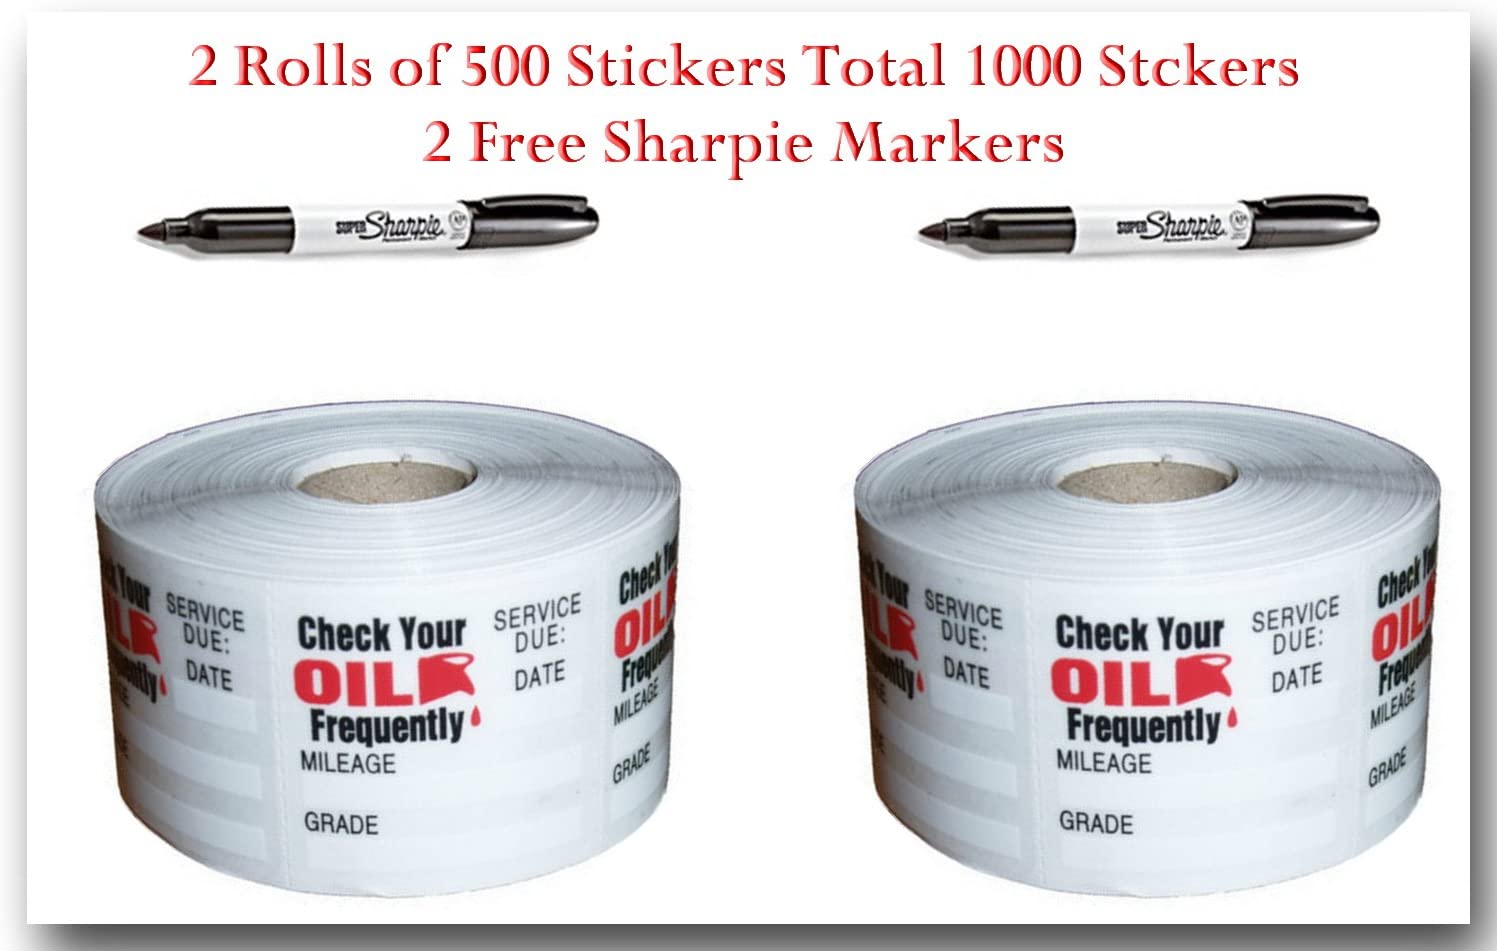 2 Rolsl of 500 Non-personalized Oil Change Stickers Total 1000 Stickers + 2 Free Sharpie Marker